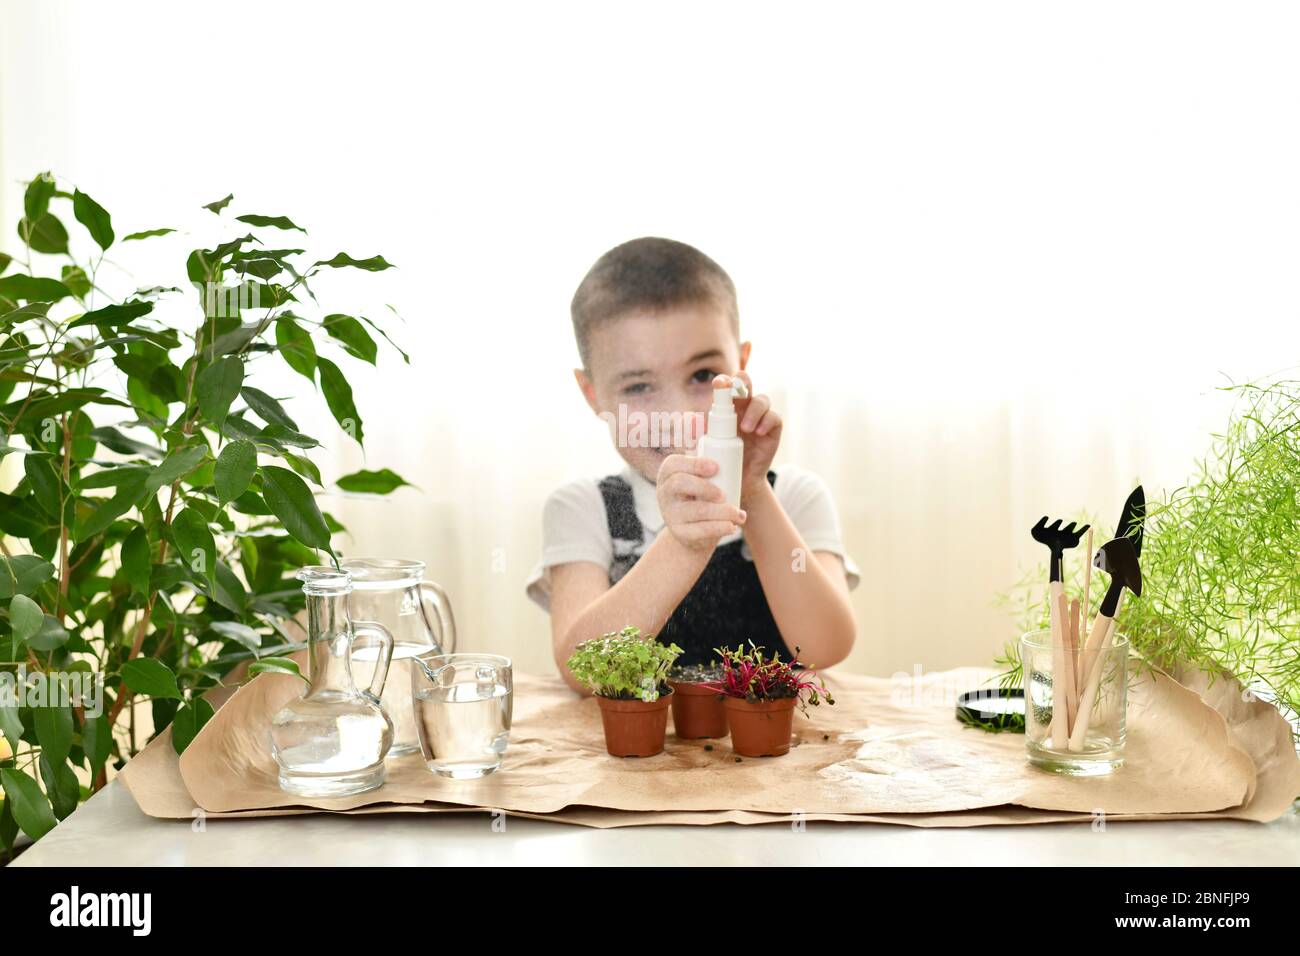 The child cares for sprouted plants in pots. Fun, splashing water in front of him takes aim. Stock Photo